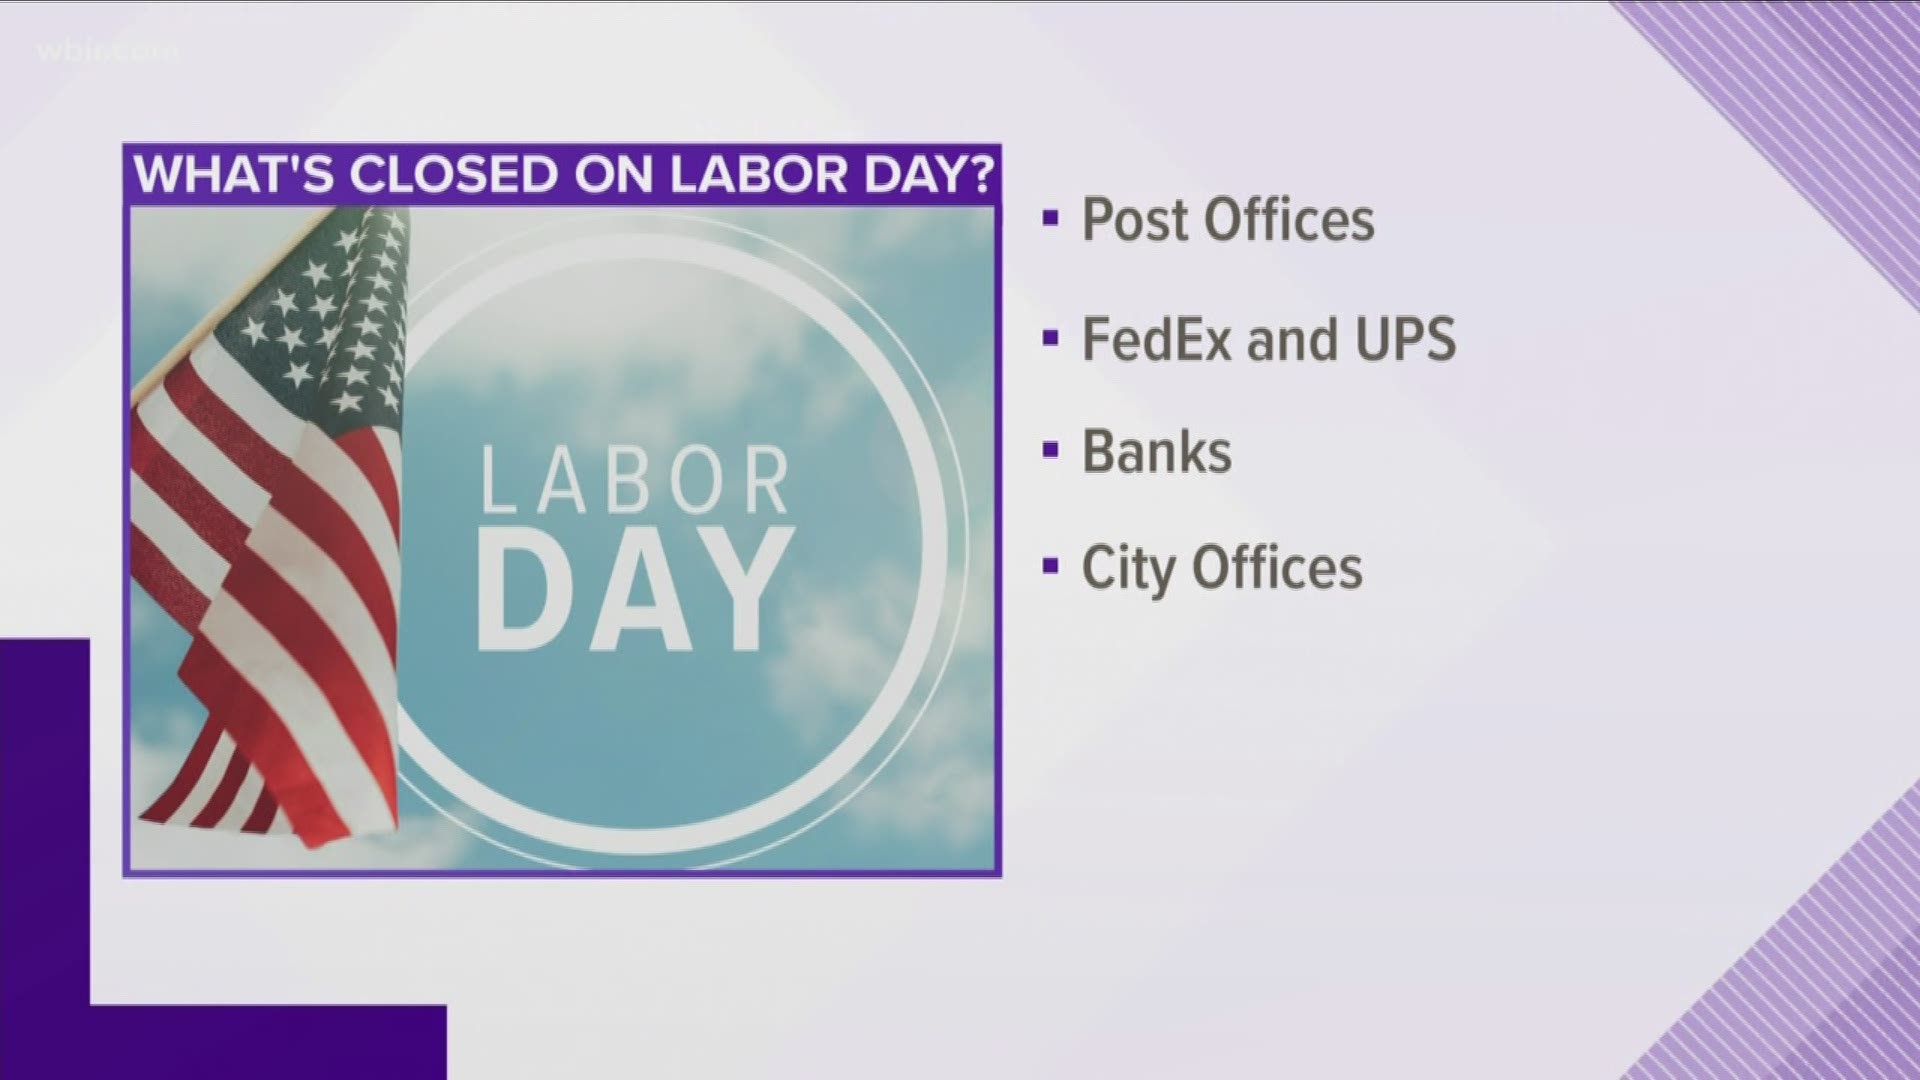 Labor Day What's closed?